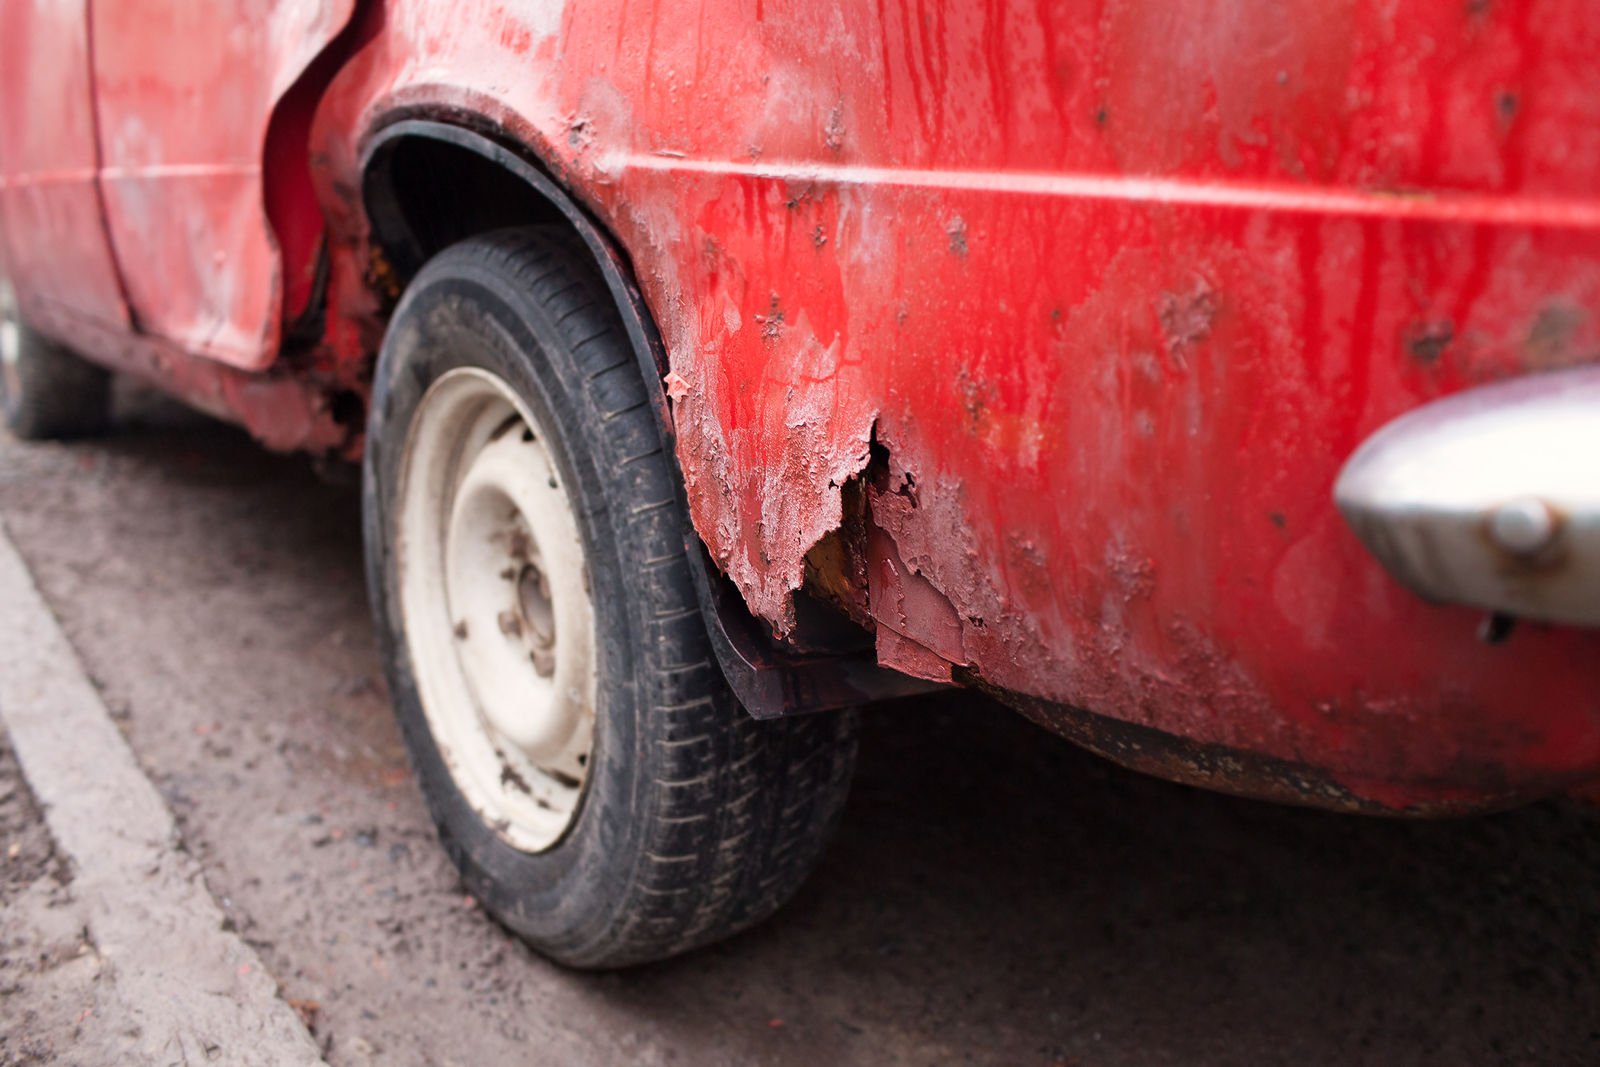 Does my car insurance cover rust damage?